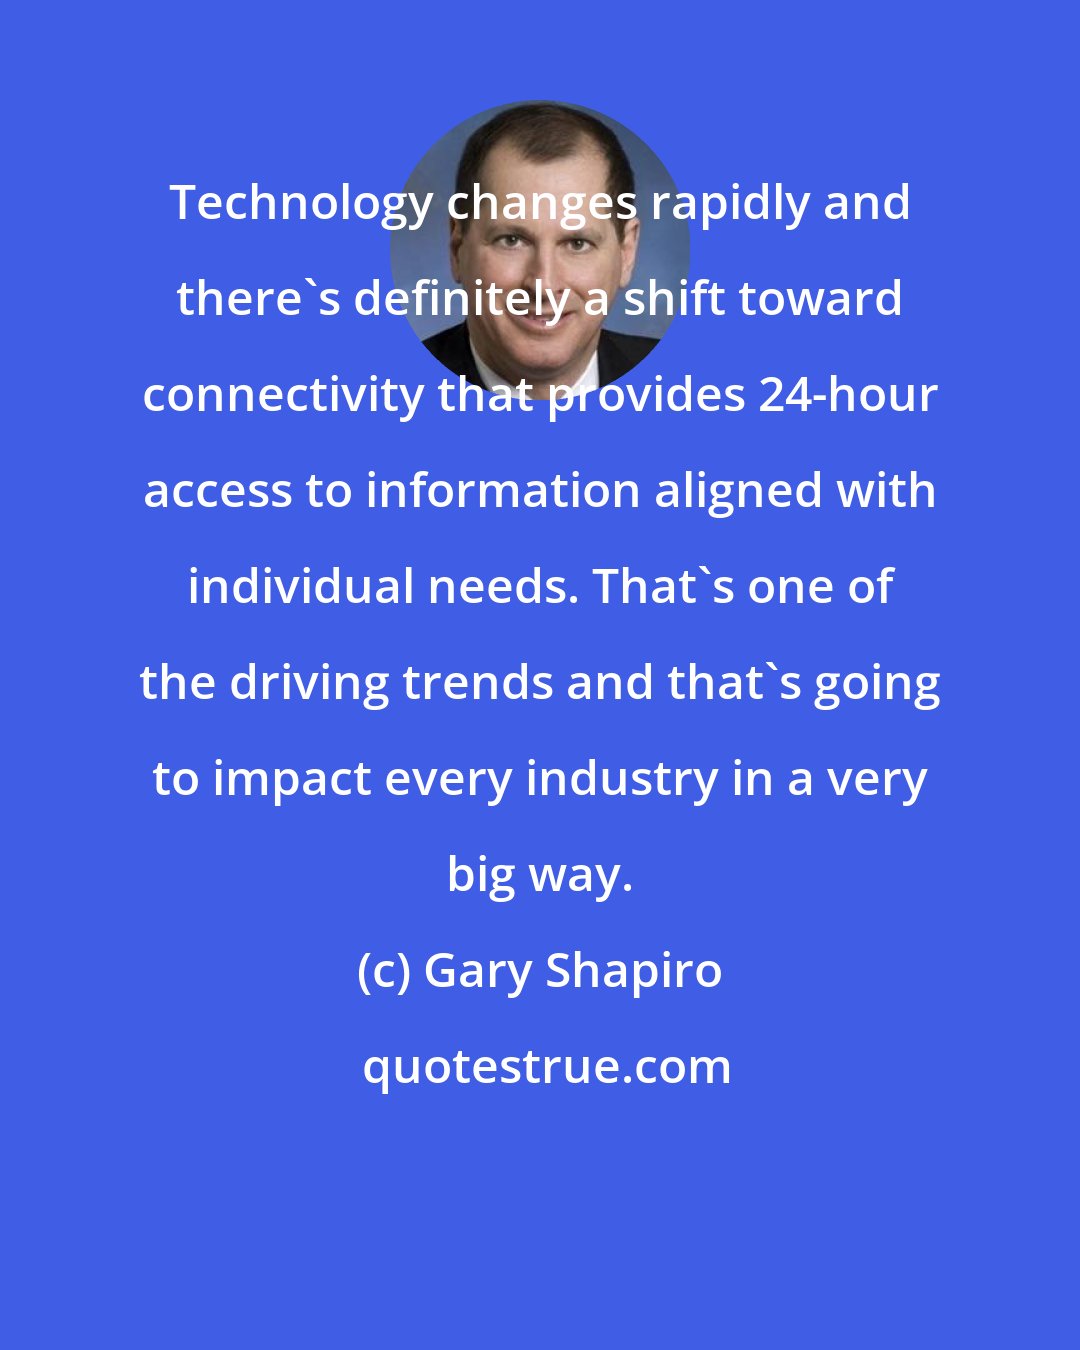 Gary Shapiro: Technology changes rapidly and there's definitely a shift toward connectivity that provides 24-hour access to information aligned with individual needs. That's one of the driving trends and that's going to impact every industry in a very big way.